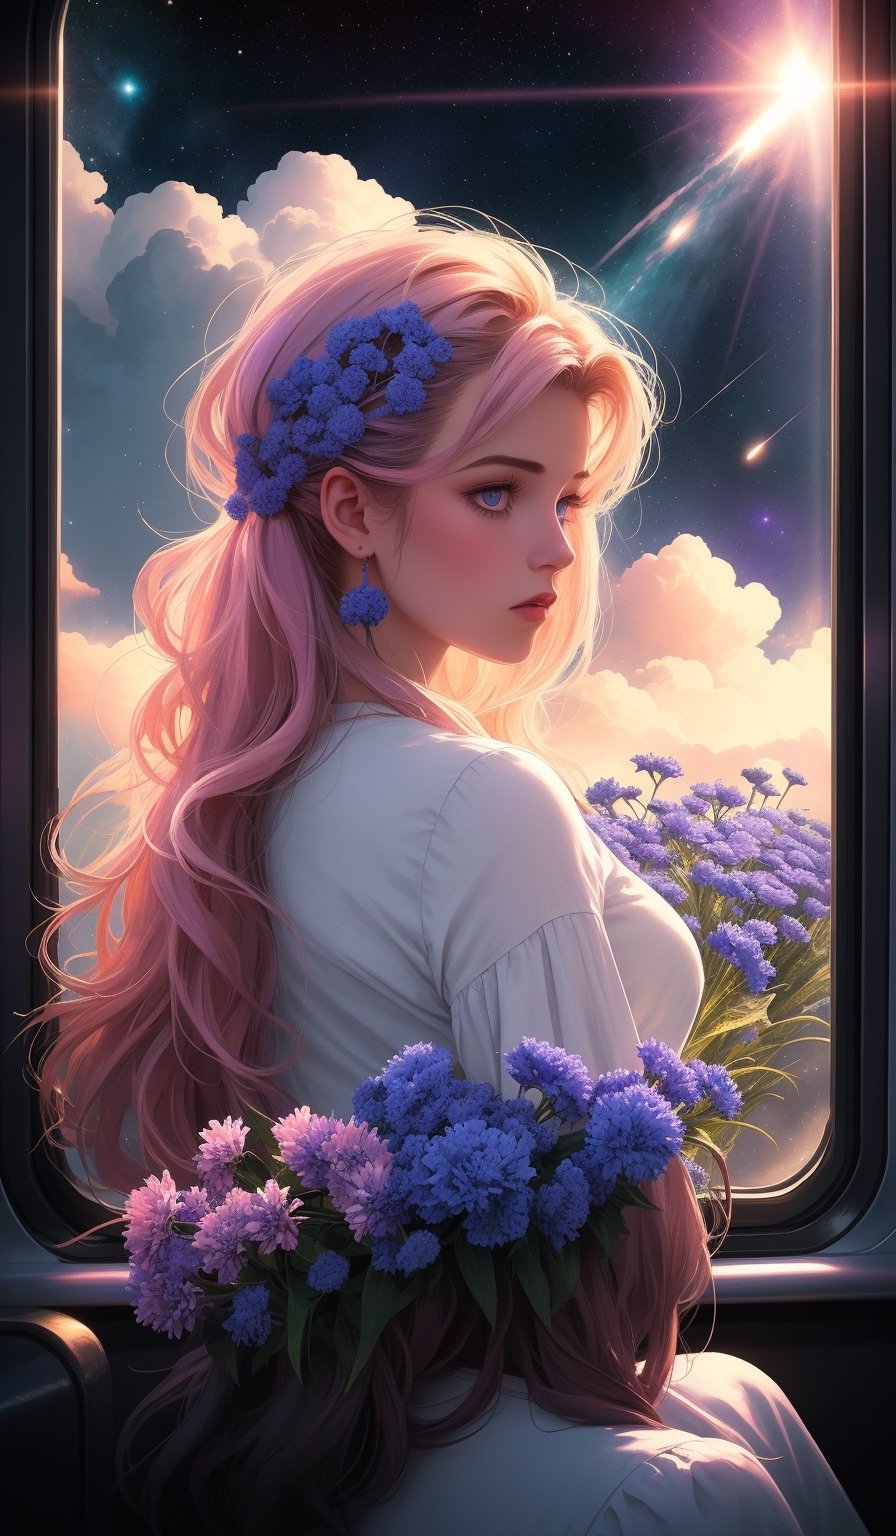 Teen girl with cornflowerblue long faux hawk hair, Hyperrealistic train carriage detailed with blooming flowers,ethereal cloud animals with shimmering outlines,passengers gazing in awe,vast sky with swirling galaxies,cosmic colors (purples, blues, pinks),dramatic lighting,mystical atmosphere
,Expressiveh,concept art,dark theme,Mysticstyle,midjourney